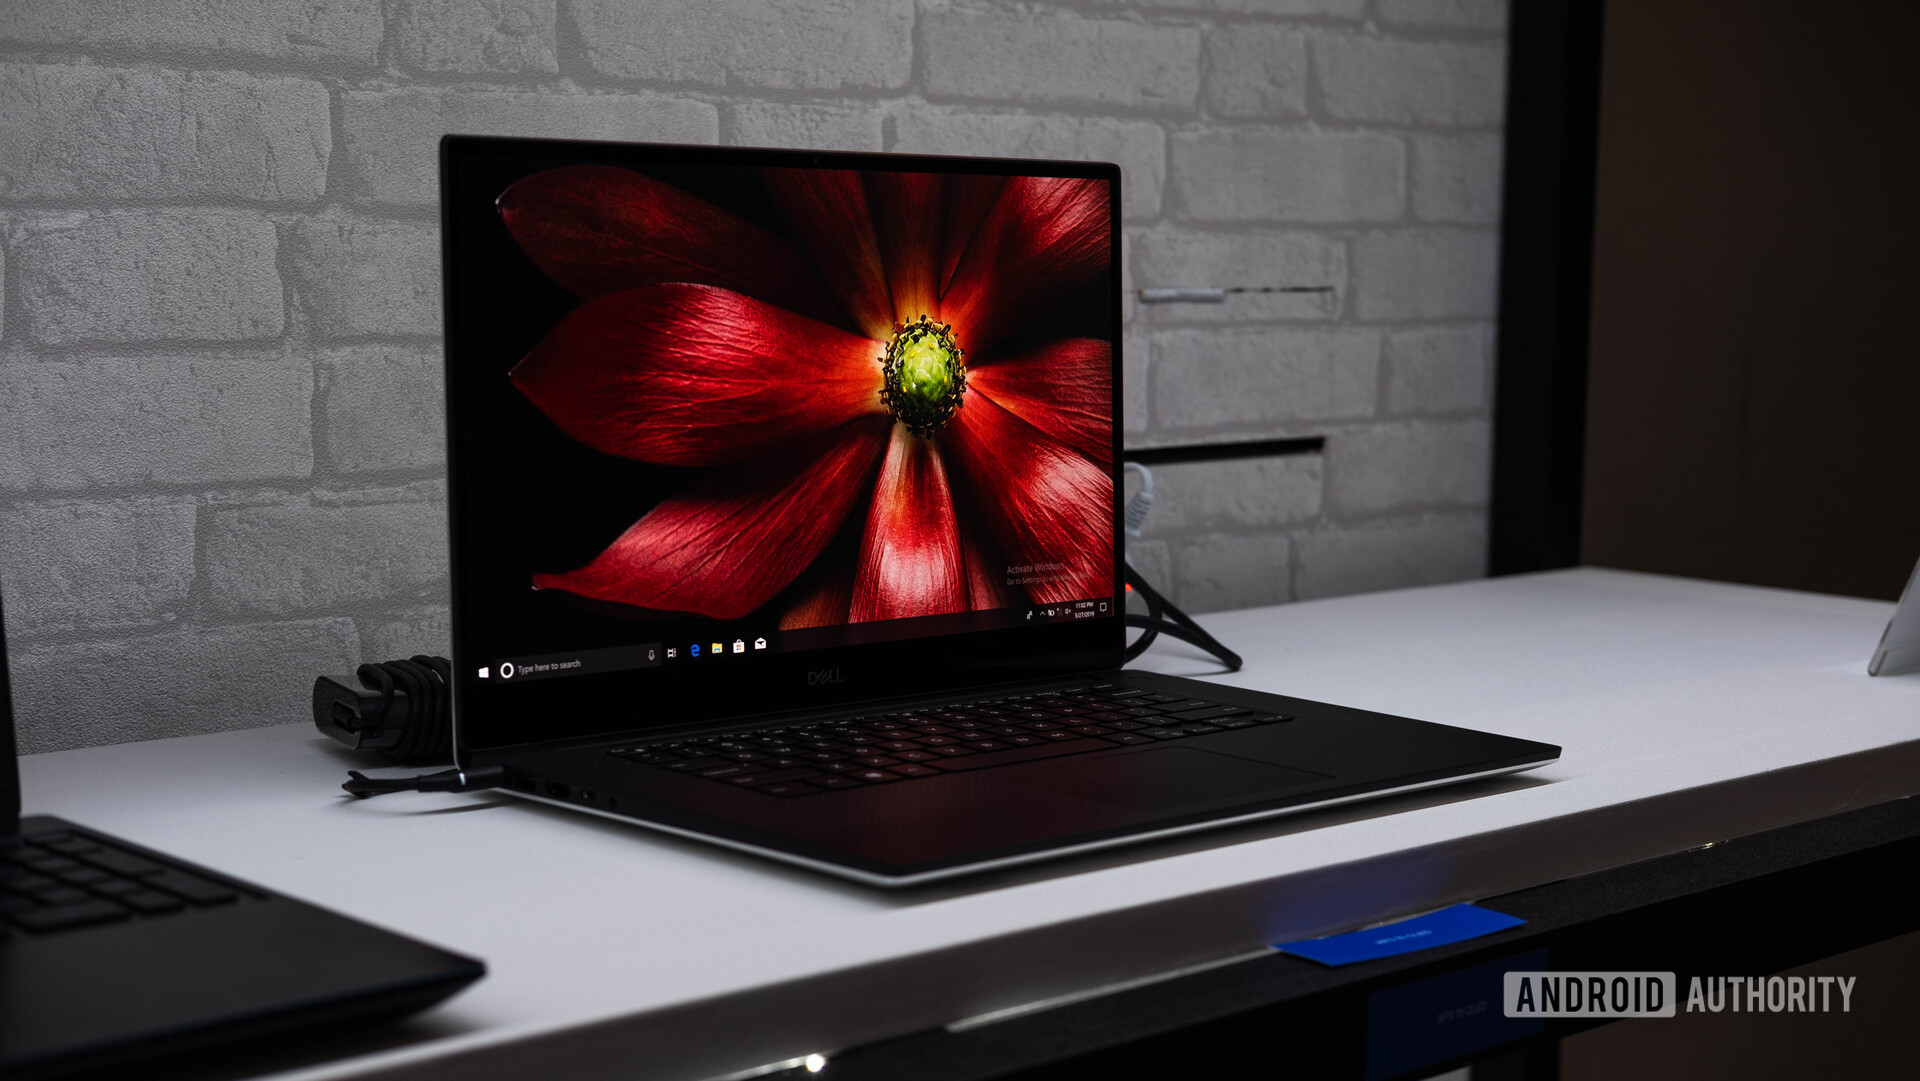 Dell xps 15 2019 oled - at angle